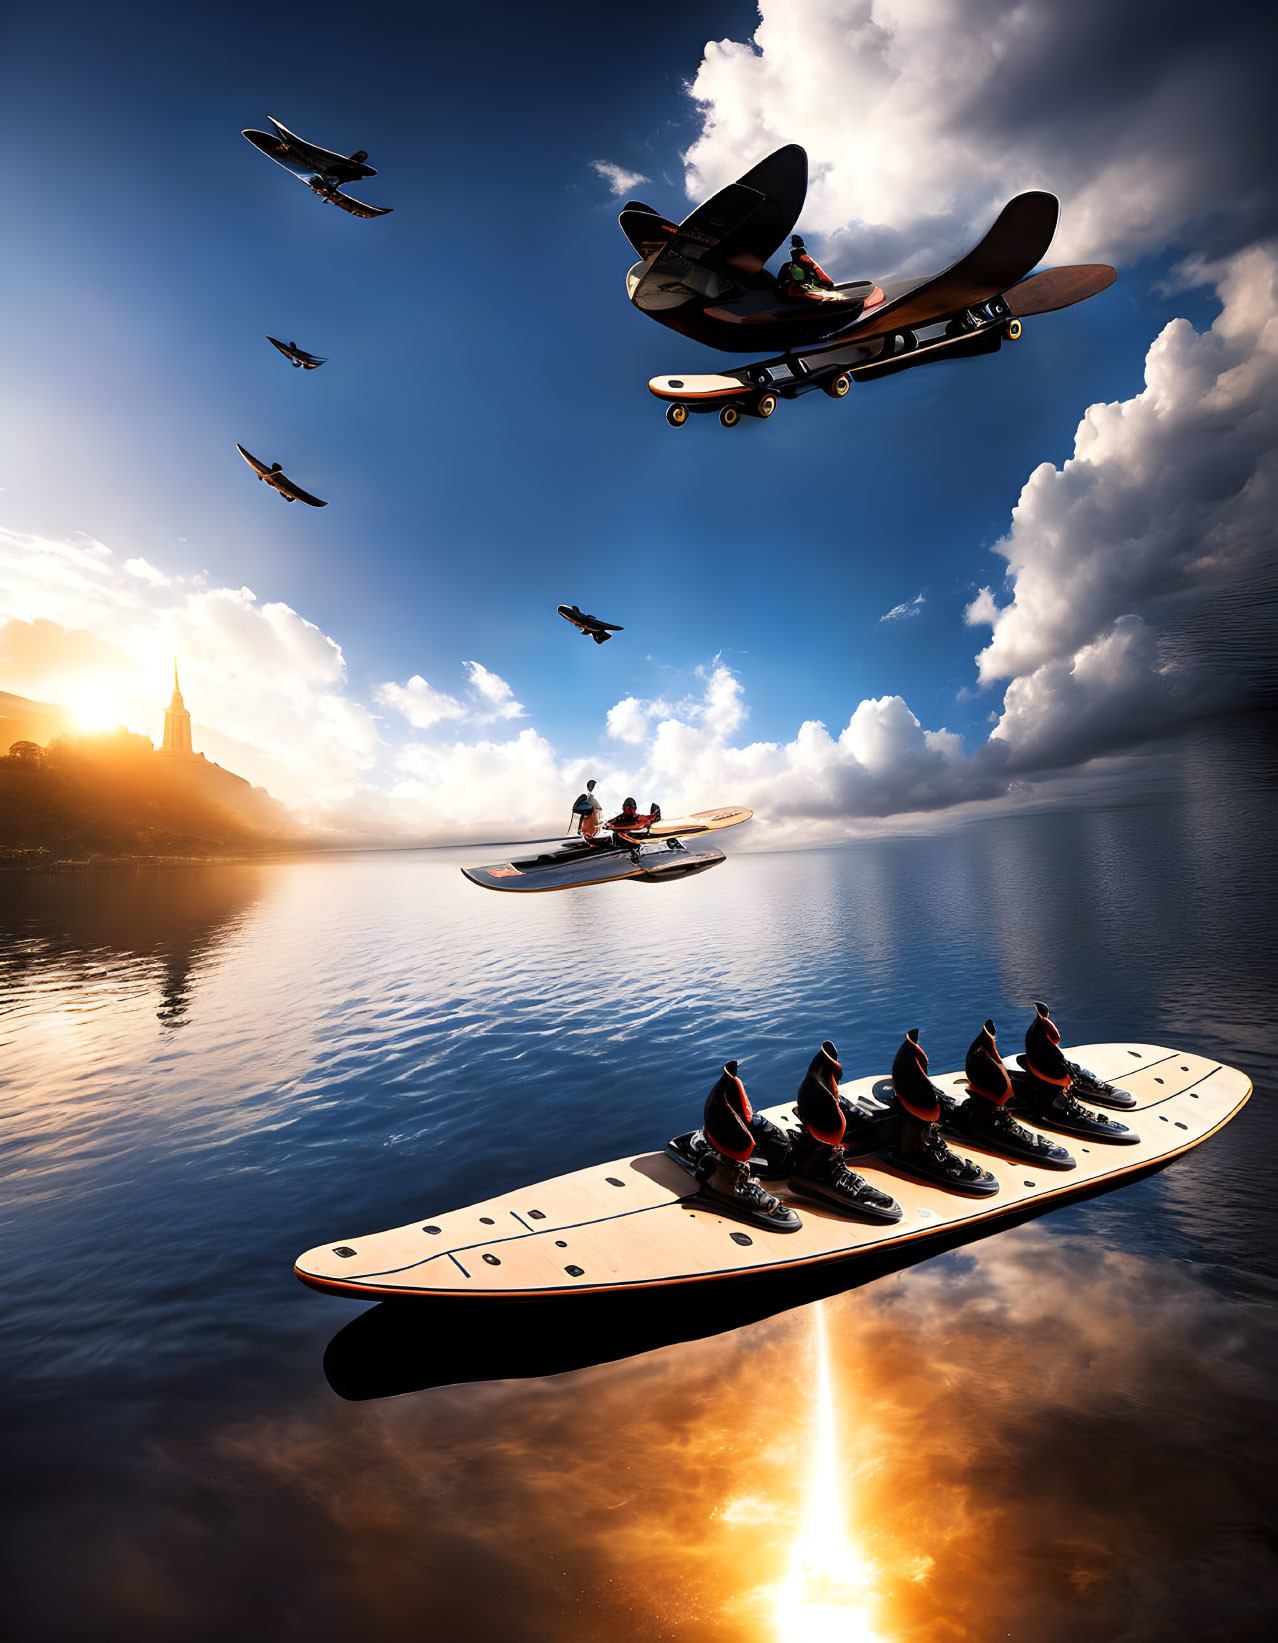 Skateboarder performs trick over surreal lake with giant floating skateboards, under cloudy sky with birds